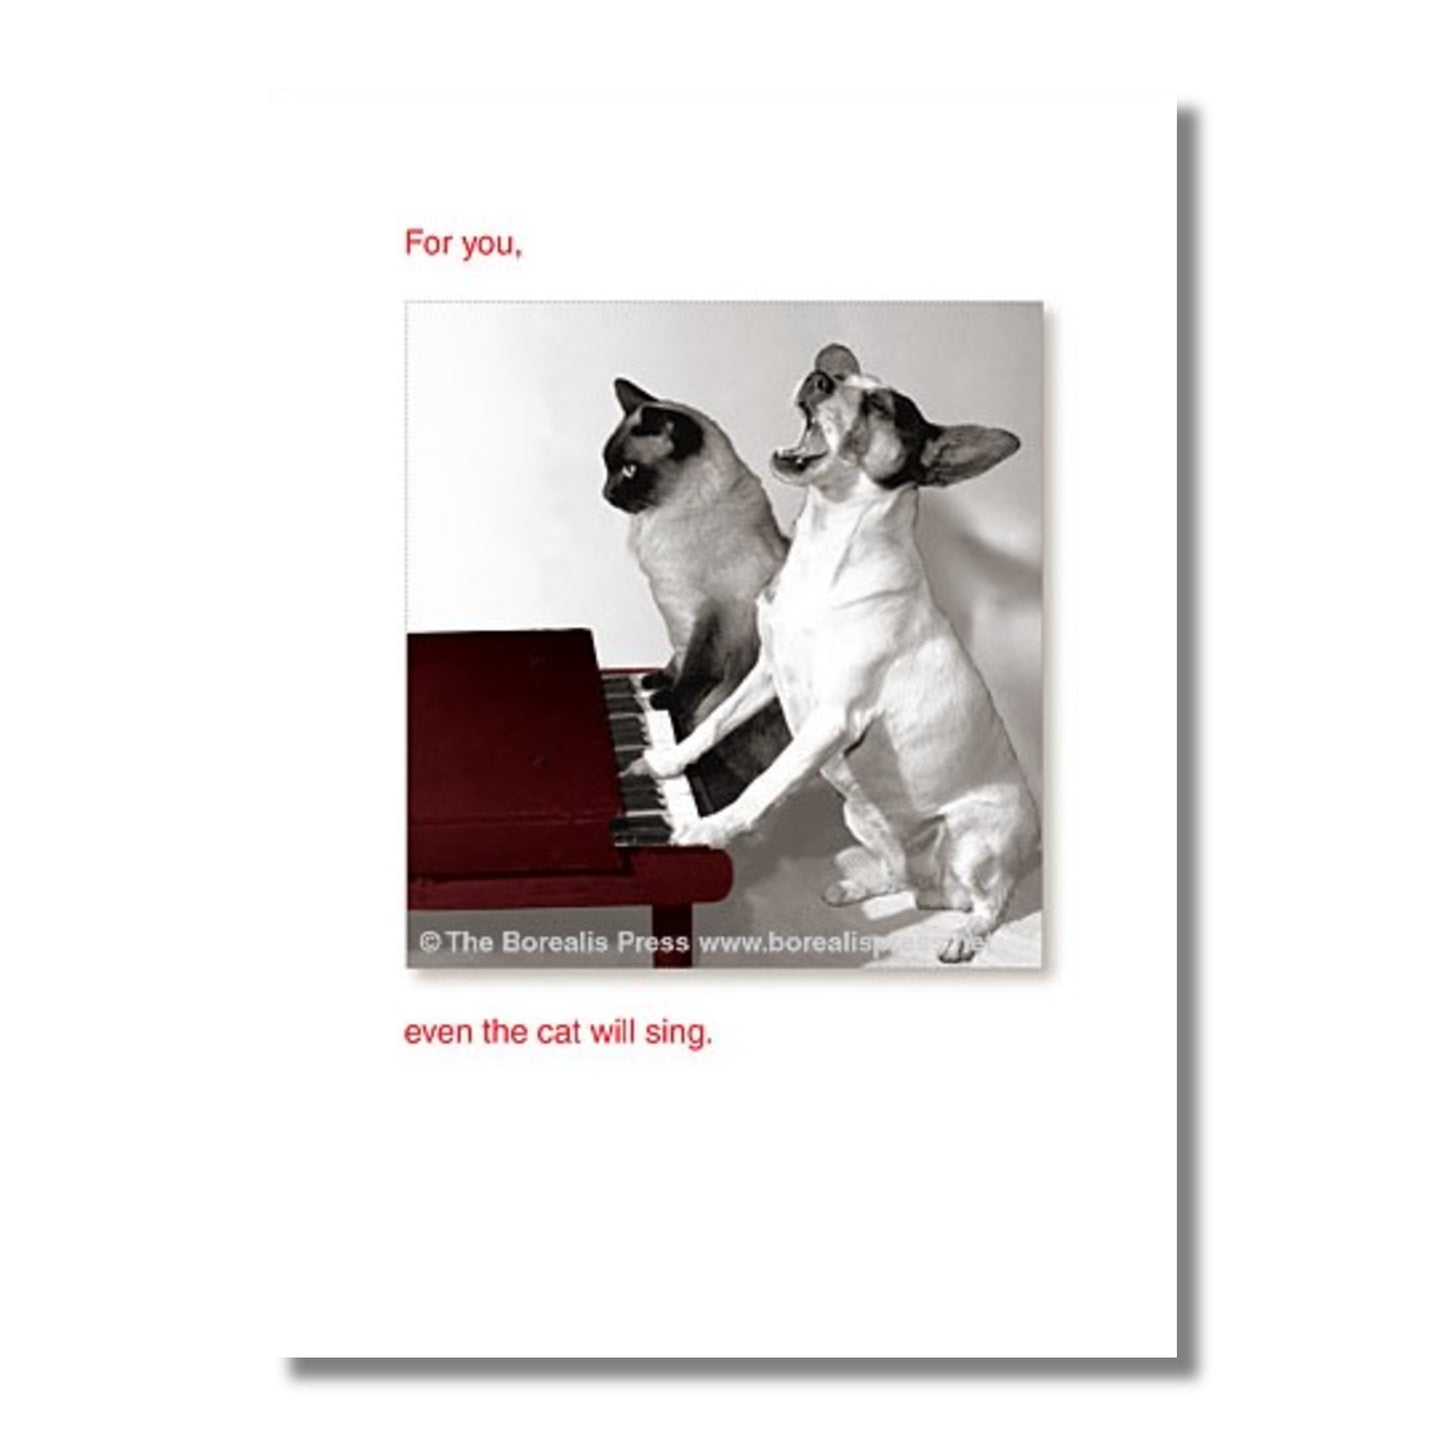 Birthday Card — For you, even the cat will sing.